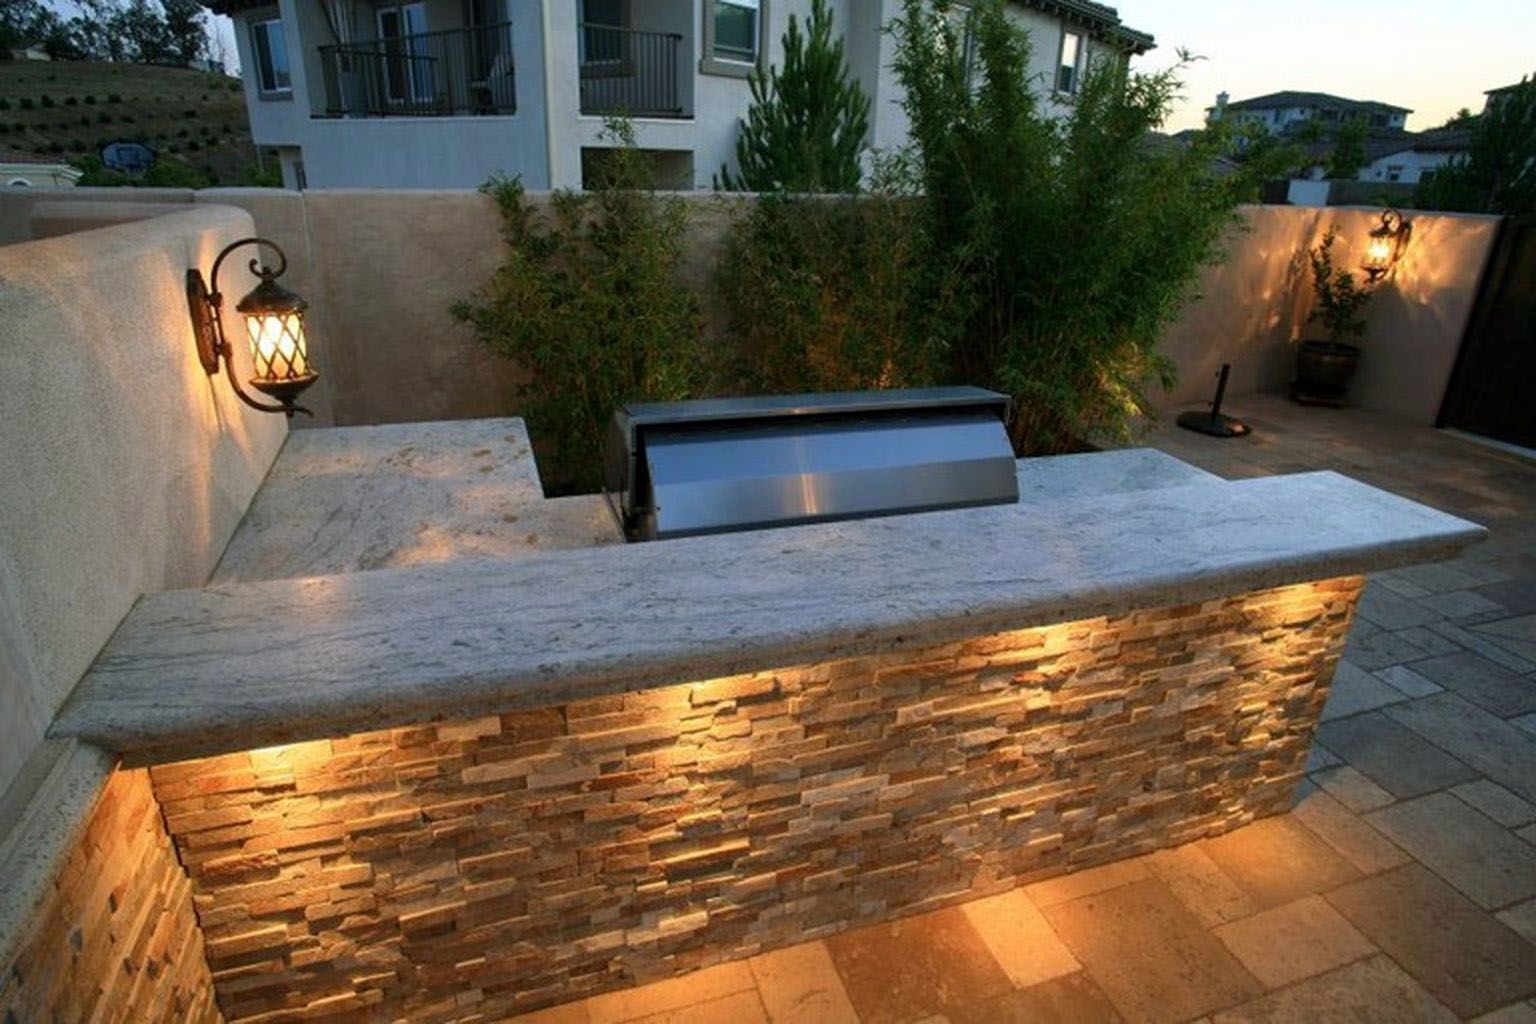 Finding The Best Spot For An Outdoor Kitchen